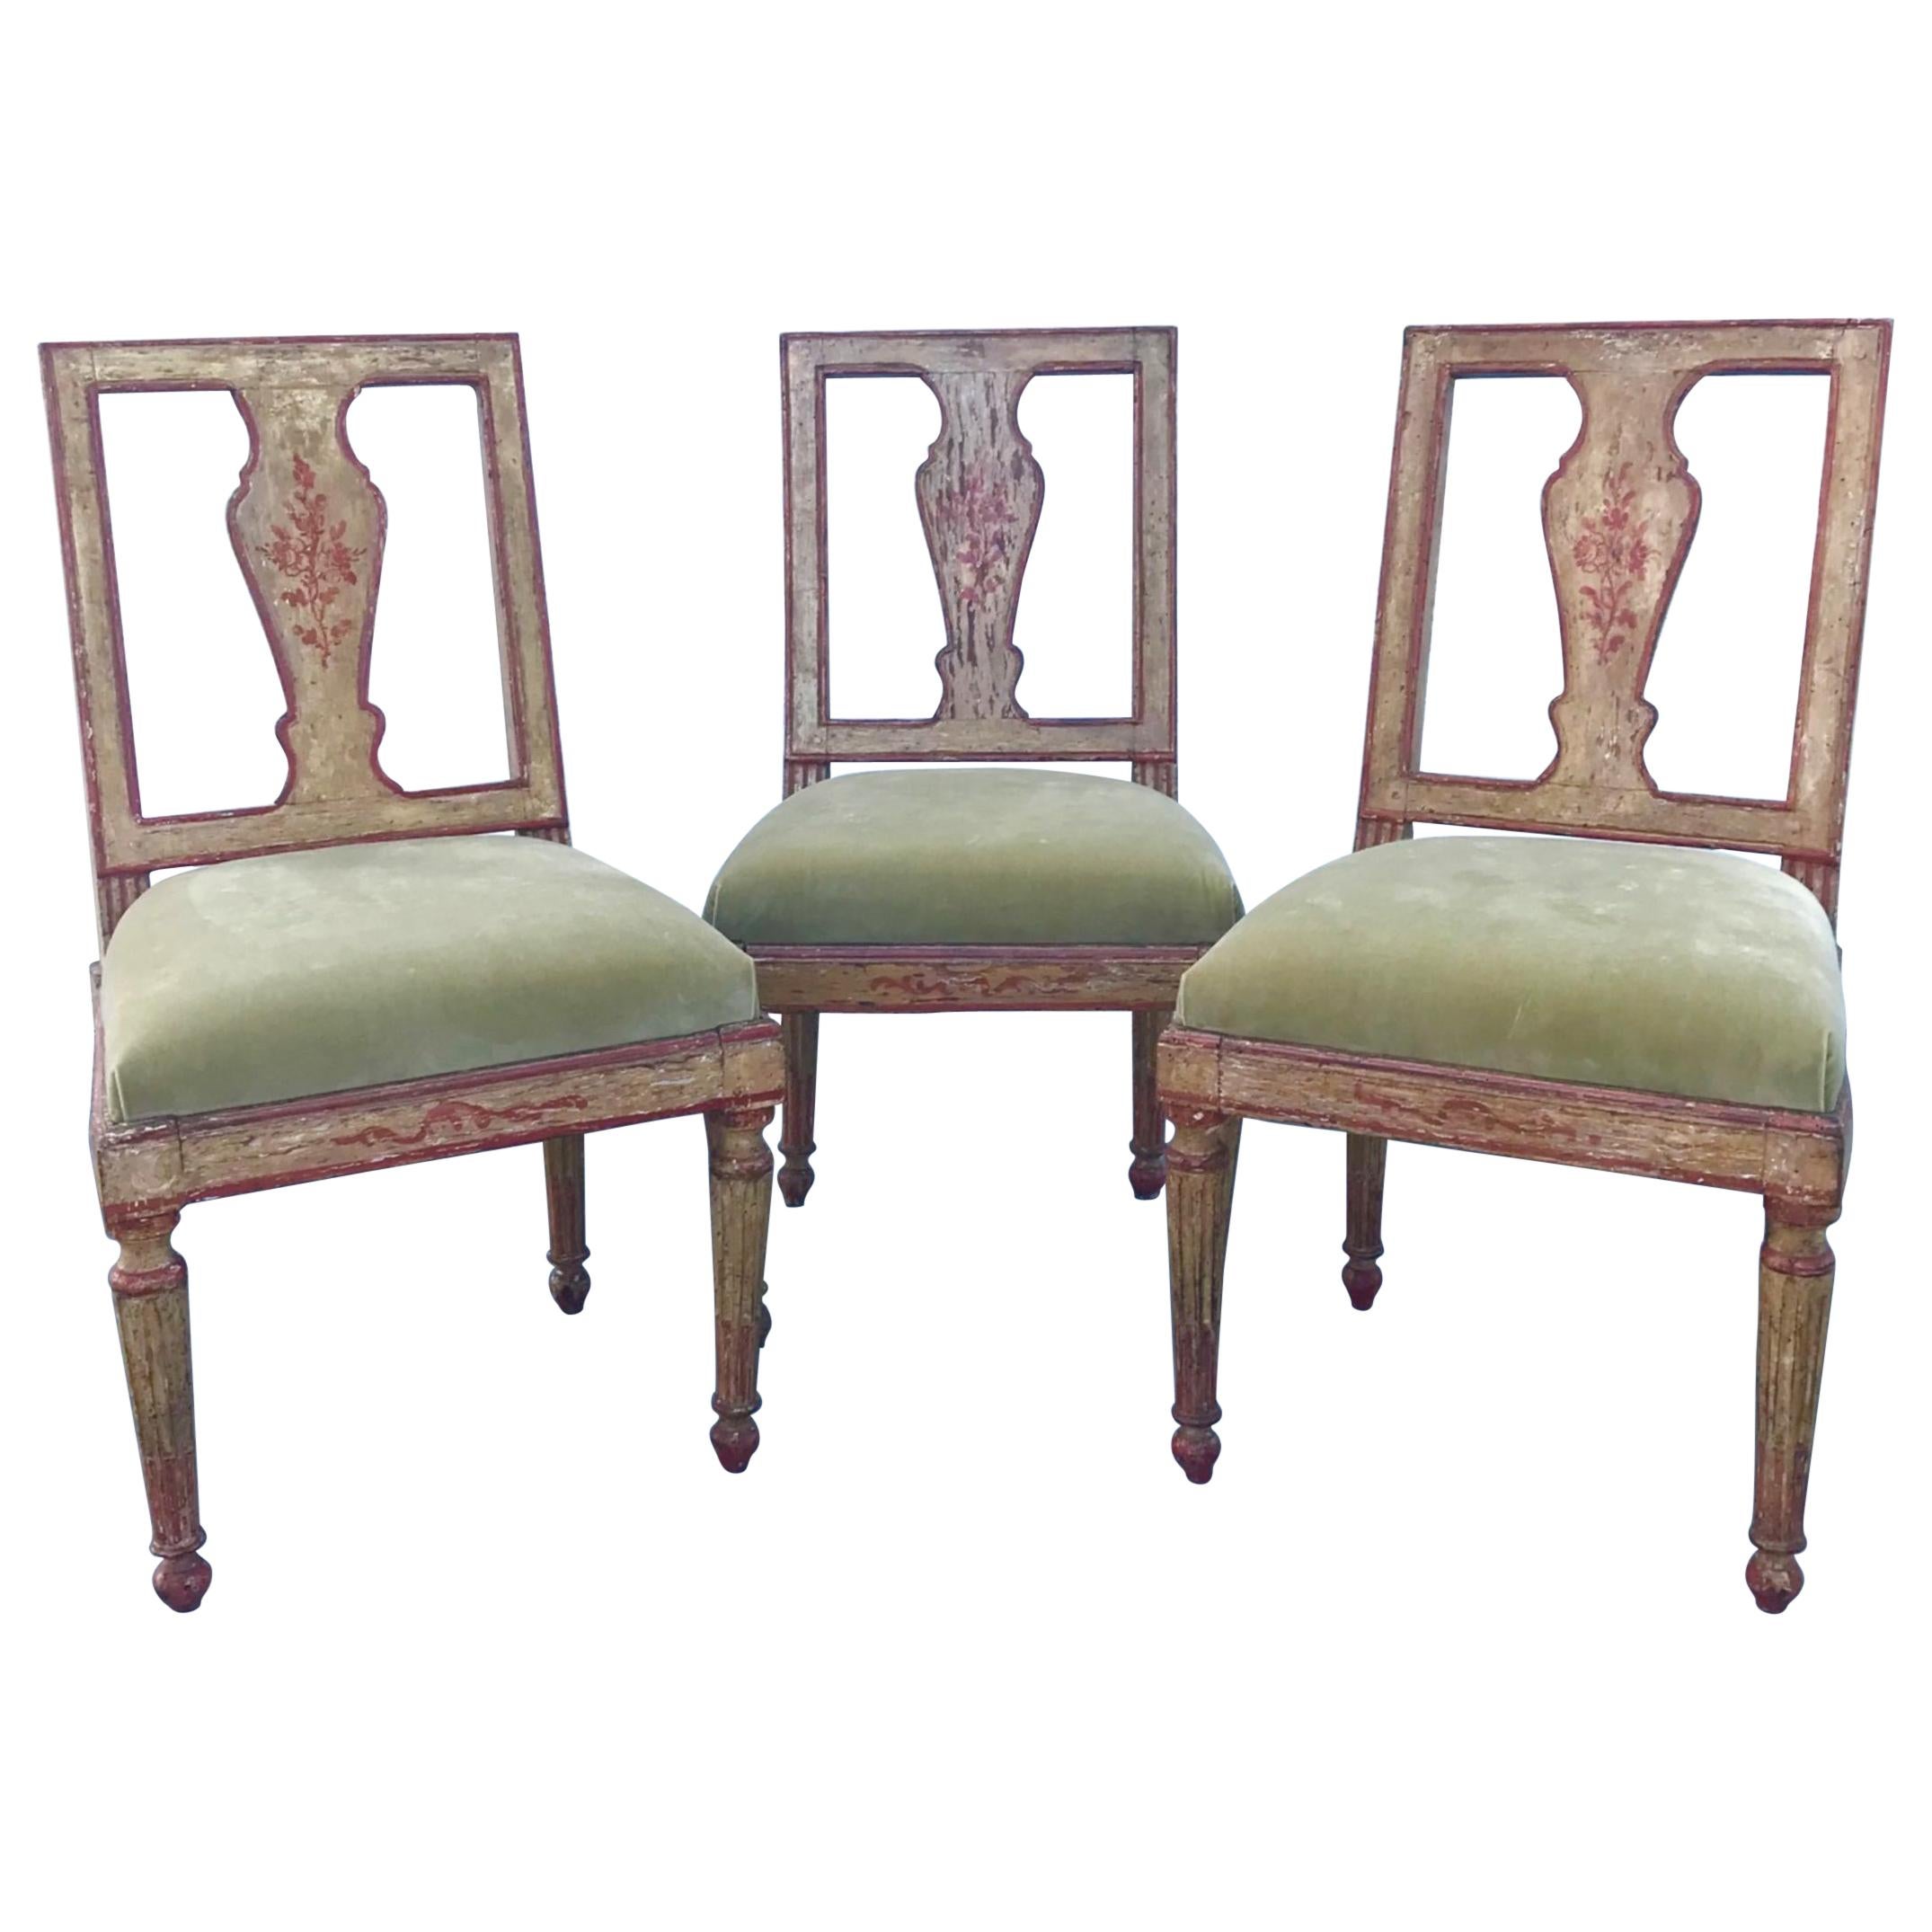 Suite of Three Italian Neoclassical Polychrome Painted Side Chairs, circa 1780